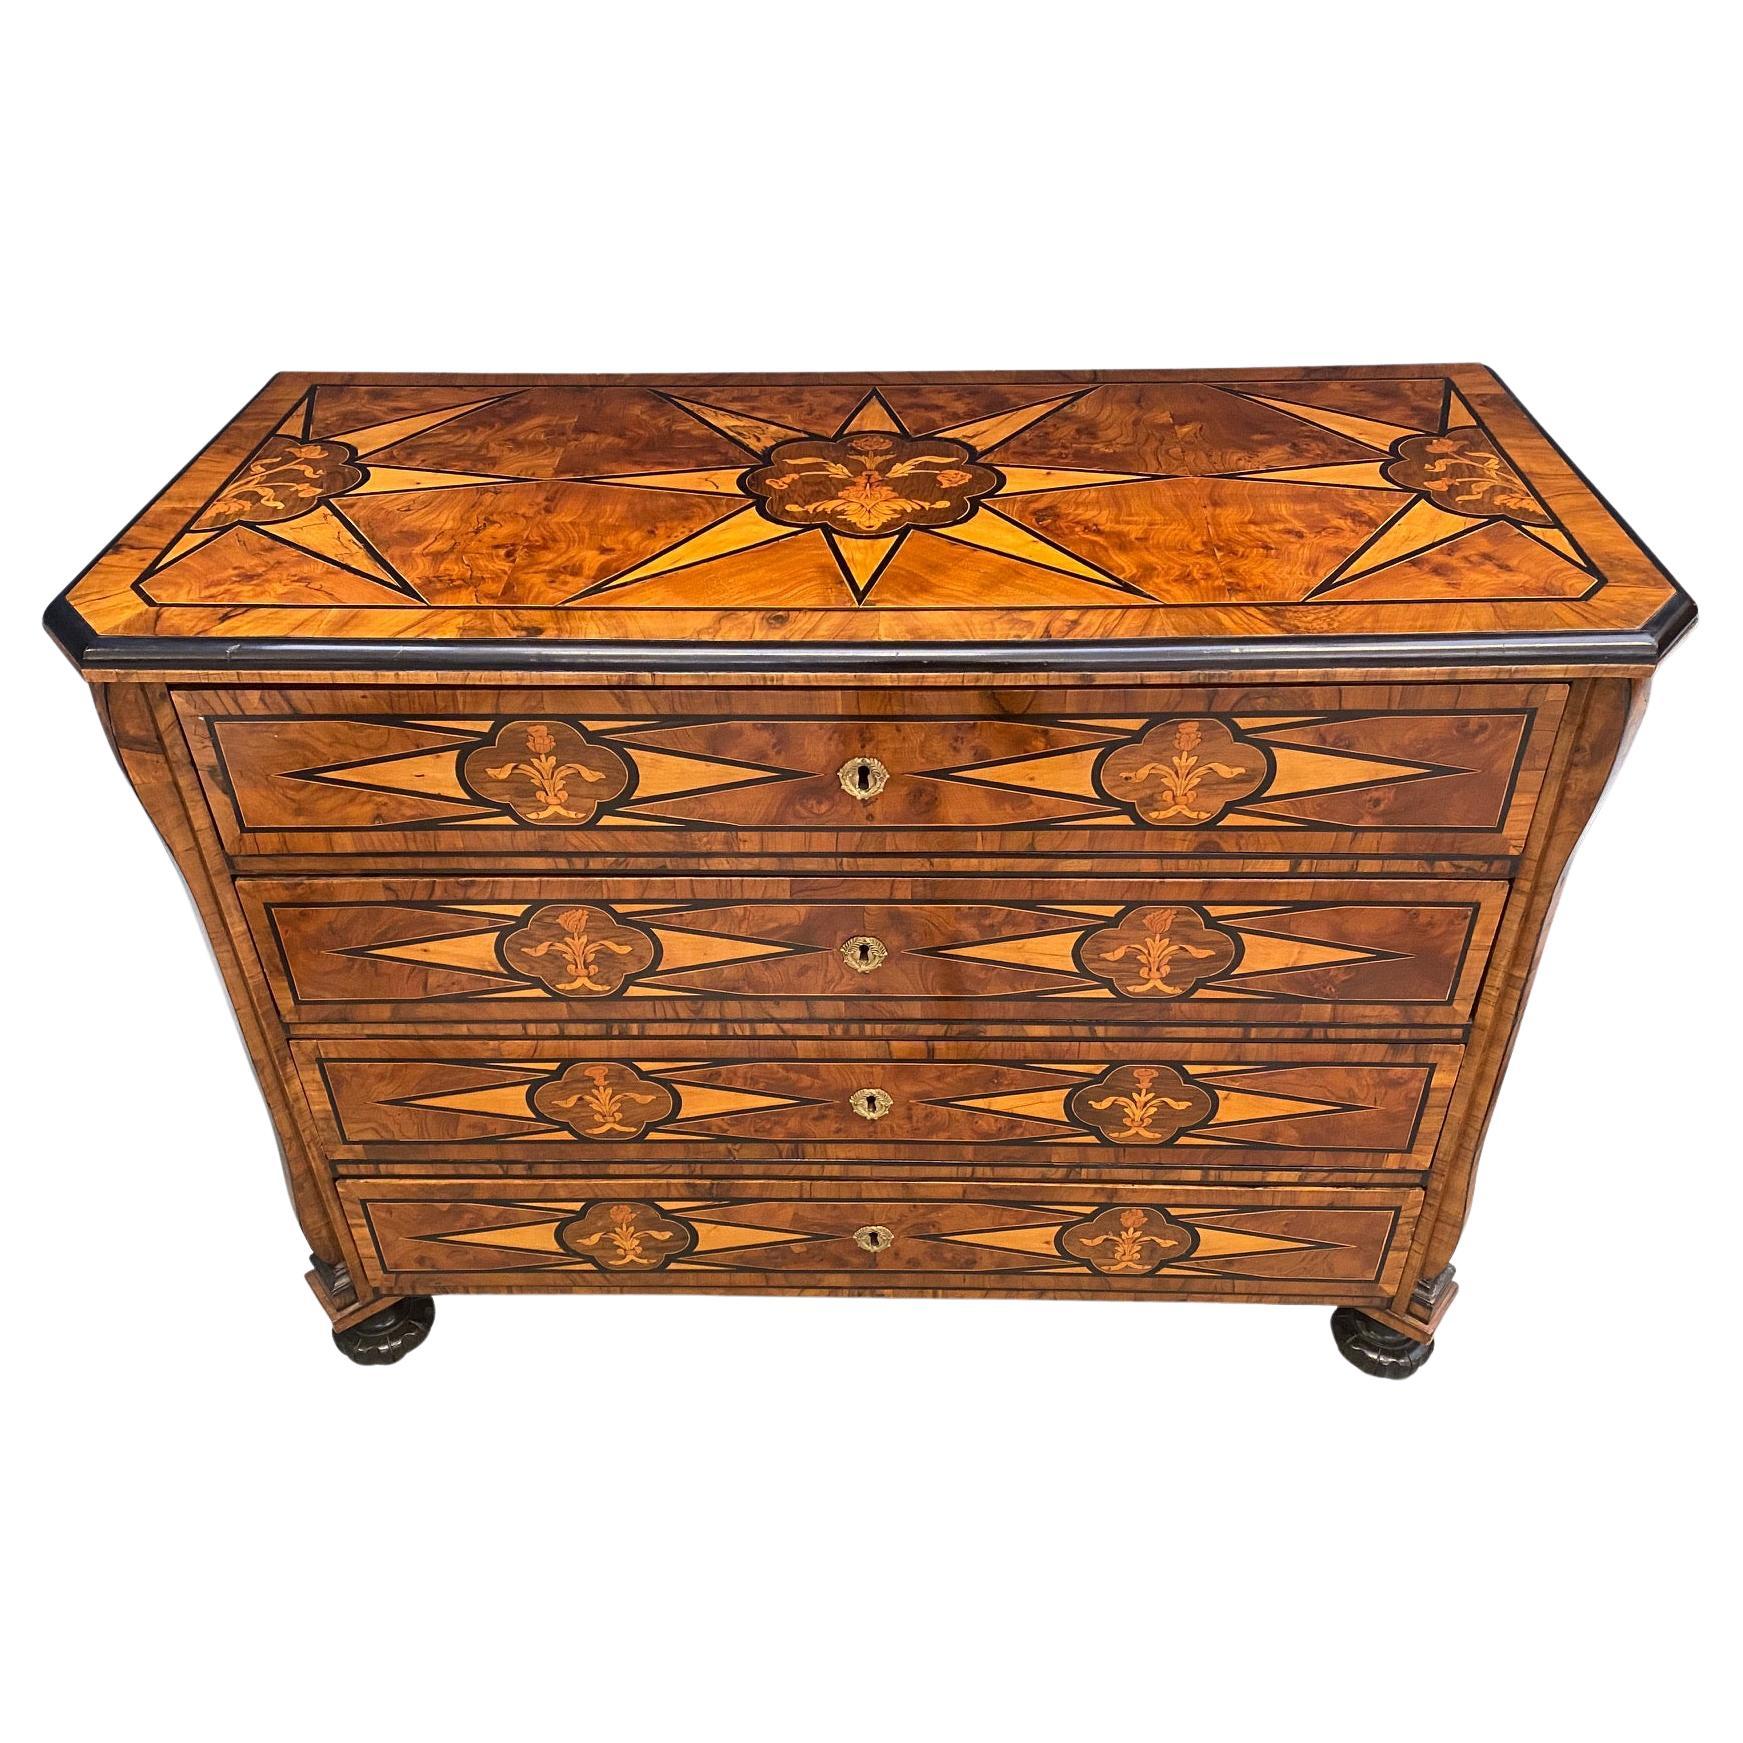 18th Century Italian Marquetry and Inlay Commode